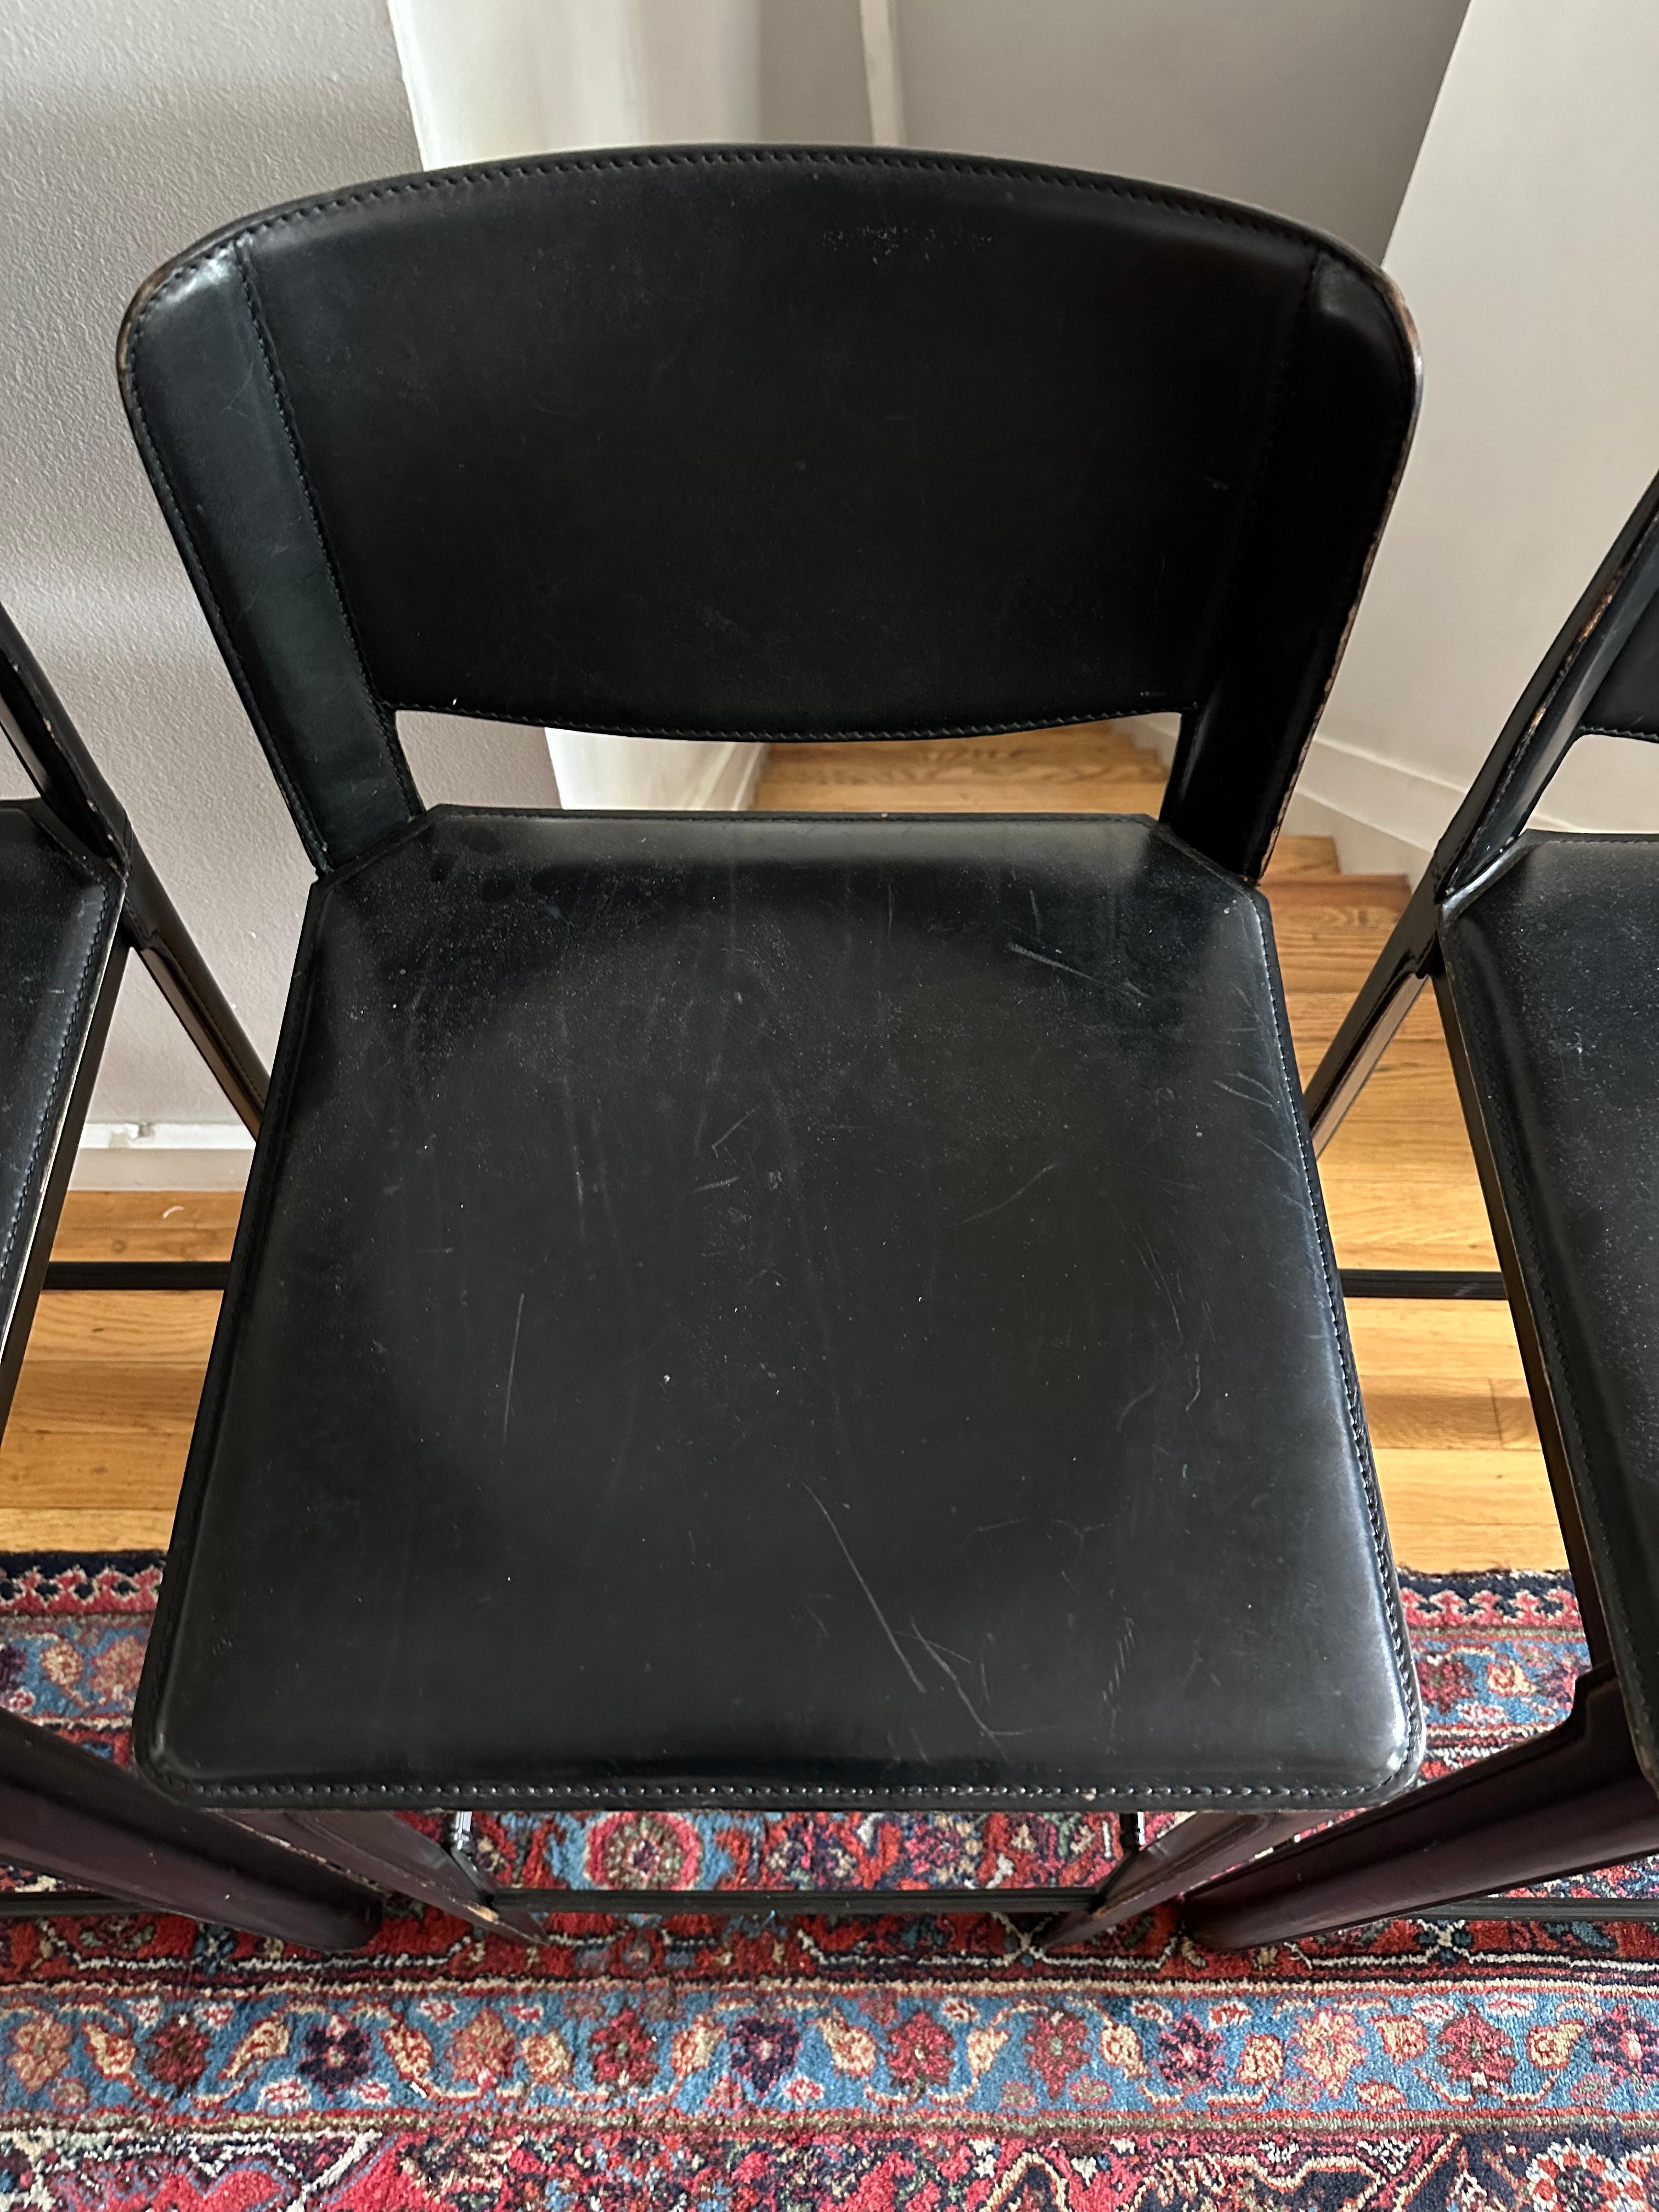 Set of three Matteo Grassi Italian black saddle-stitched leather over metal bar stools, circa 1980s. Priced as a set of three.